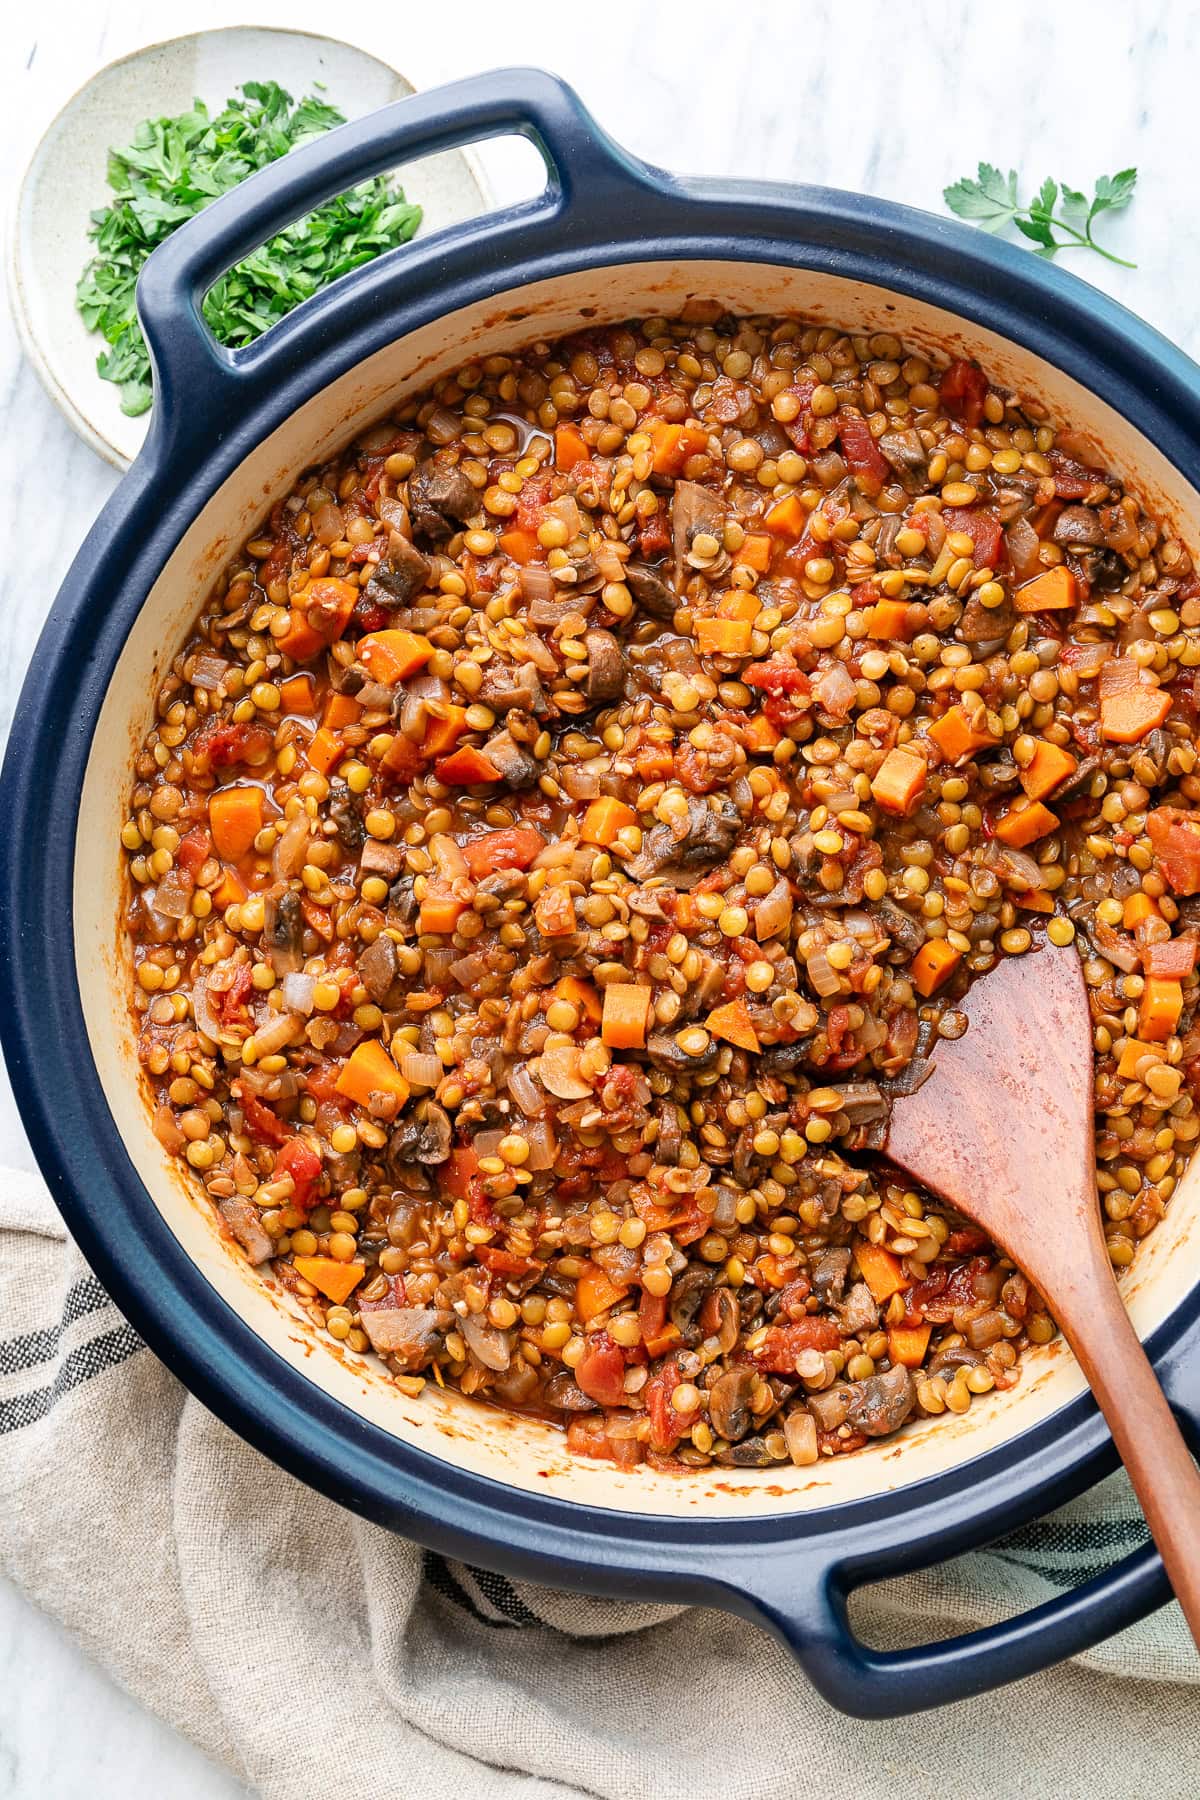 top down view of lentil ragu in a blue pot with wooden spoon and items surrounding.